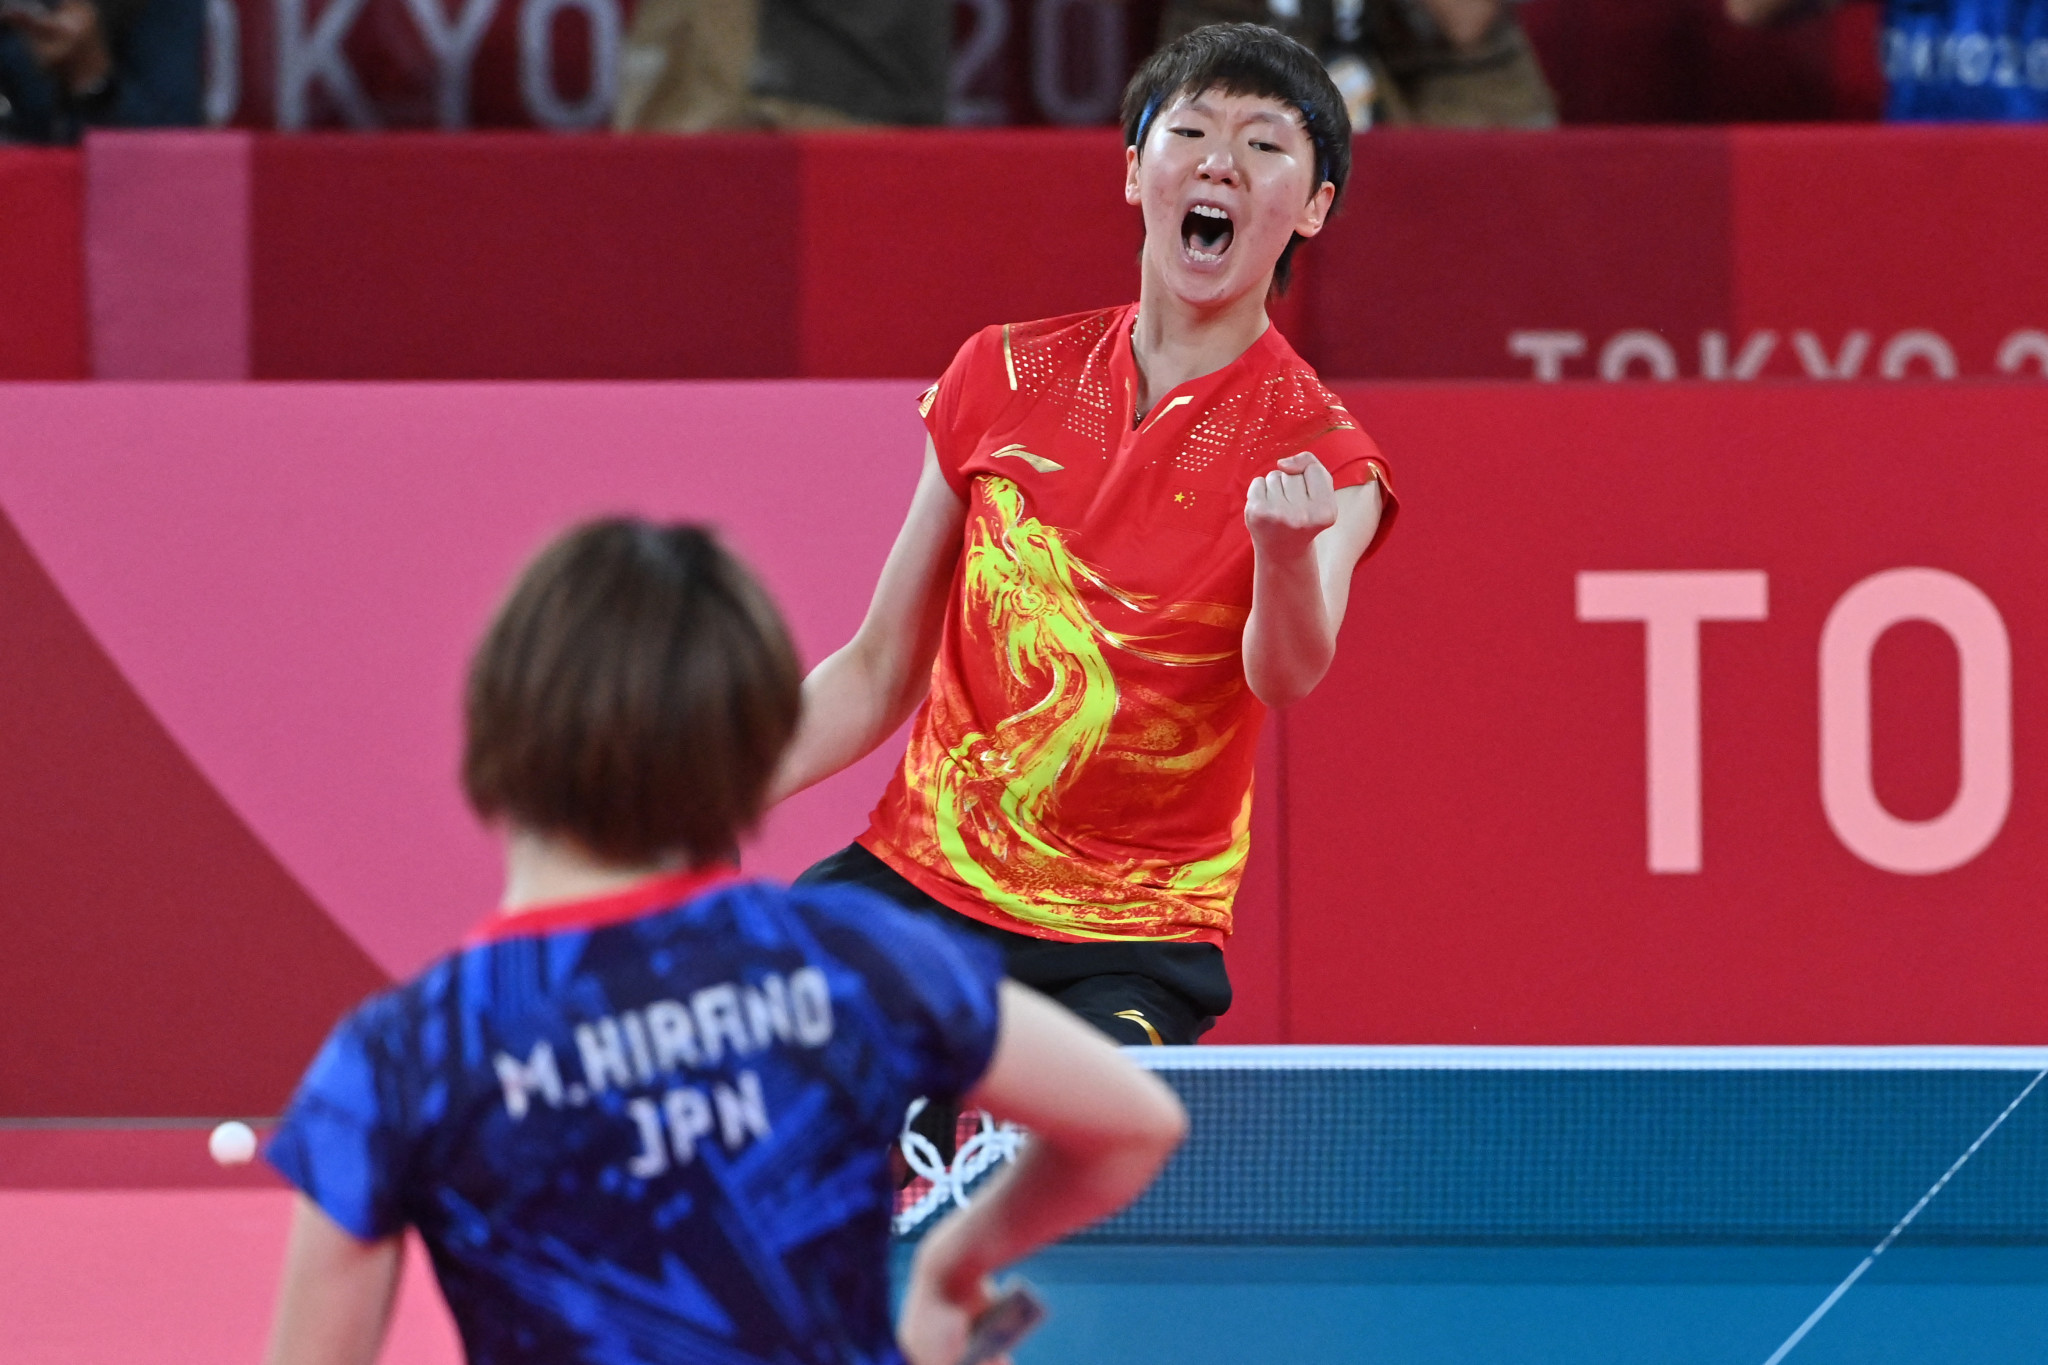 China have won all 51 matches they have played in the women's team table tennis event at the Olympics ©Getty Images